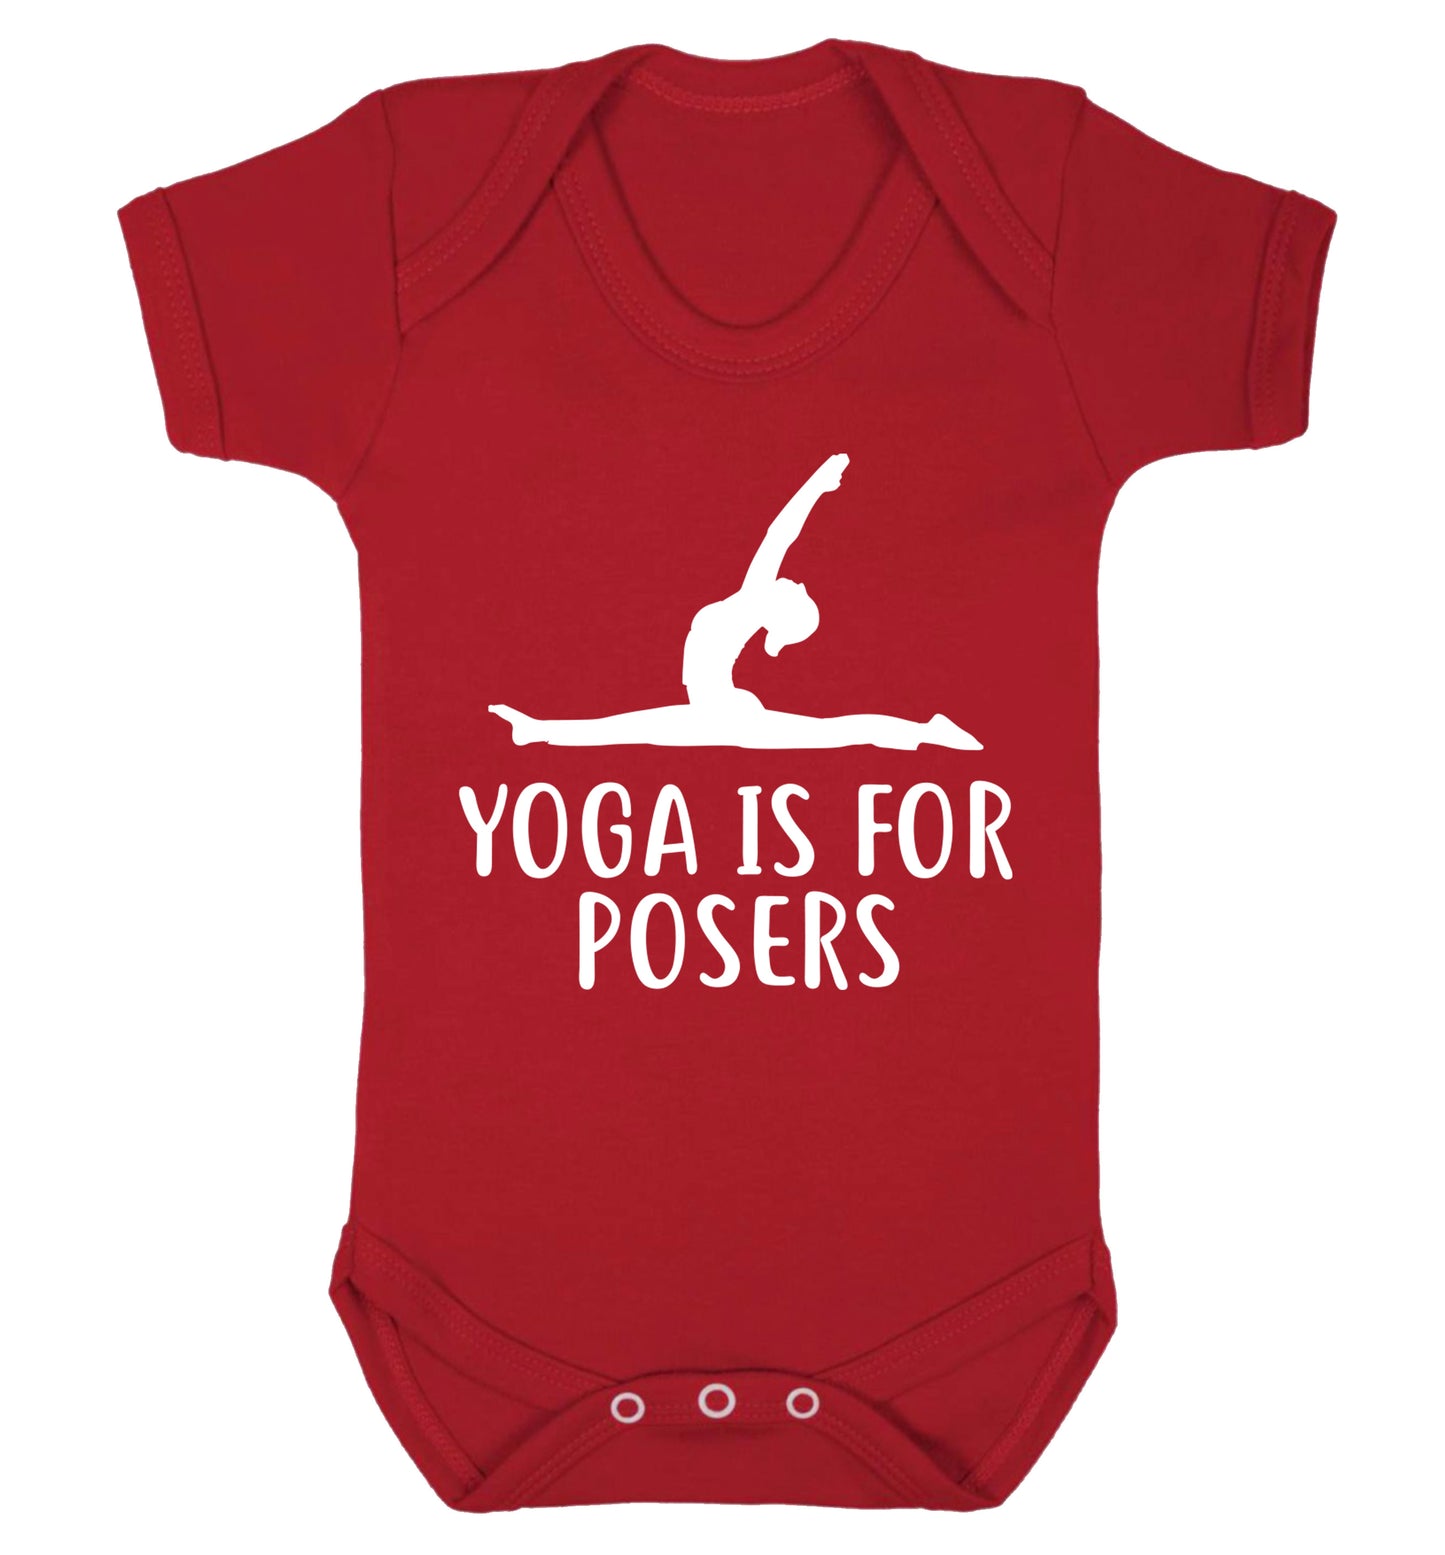 Yoga is for posers Baby Vest red 18-24 months